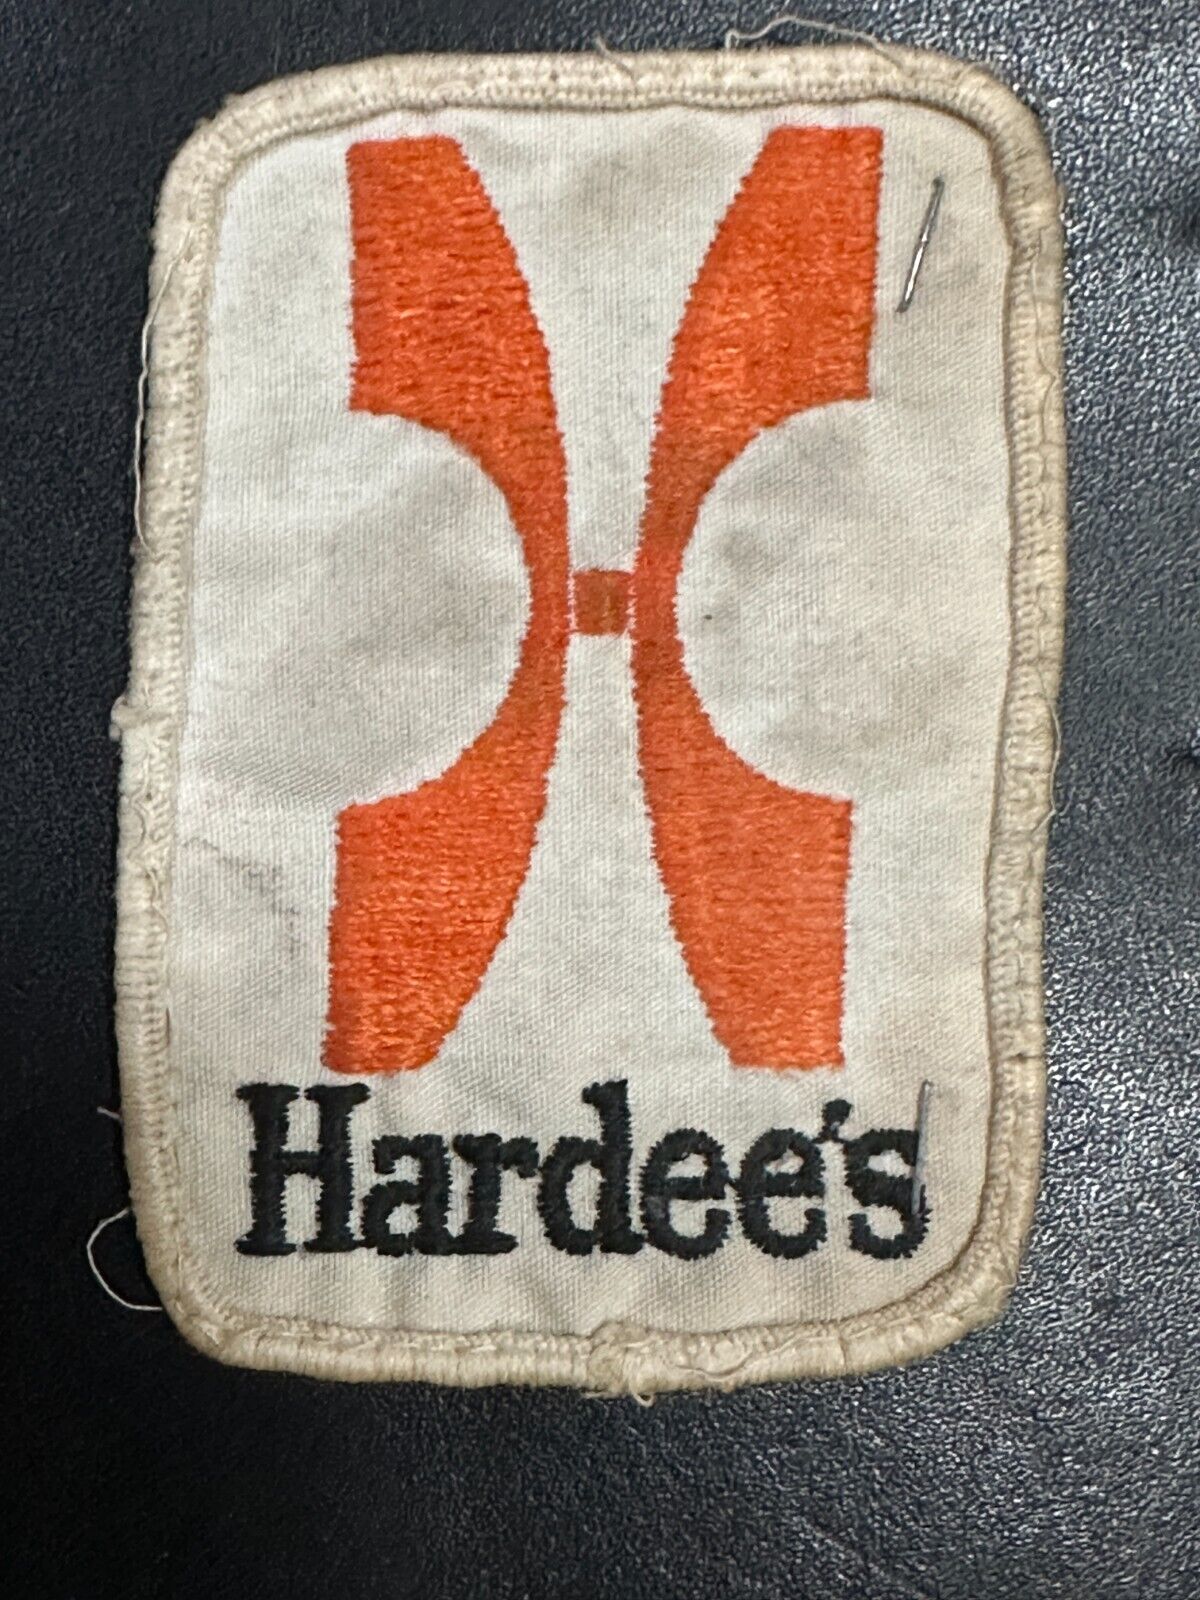 Official Hardee’s 1970's Fabric Patch - Authentic Piece of Route 22 Union NJ